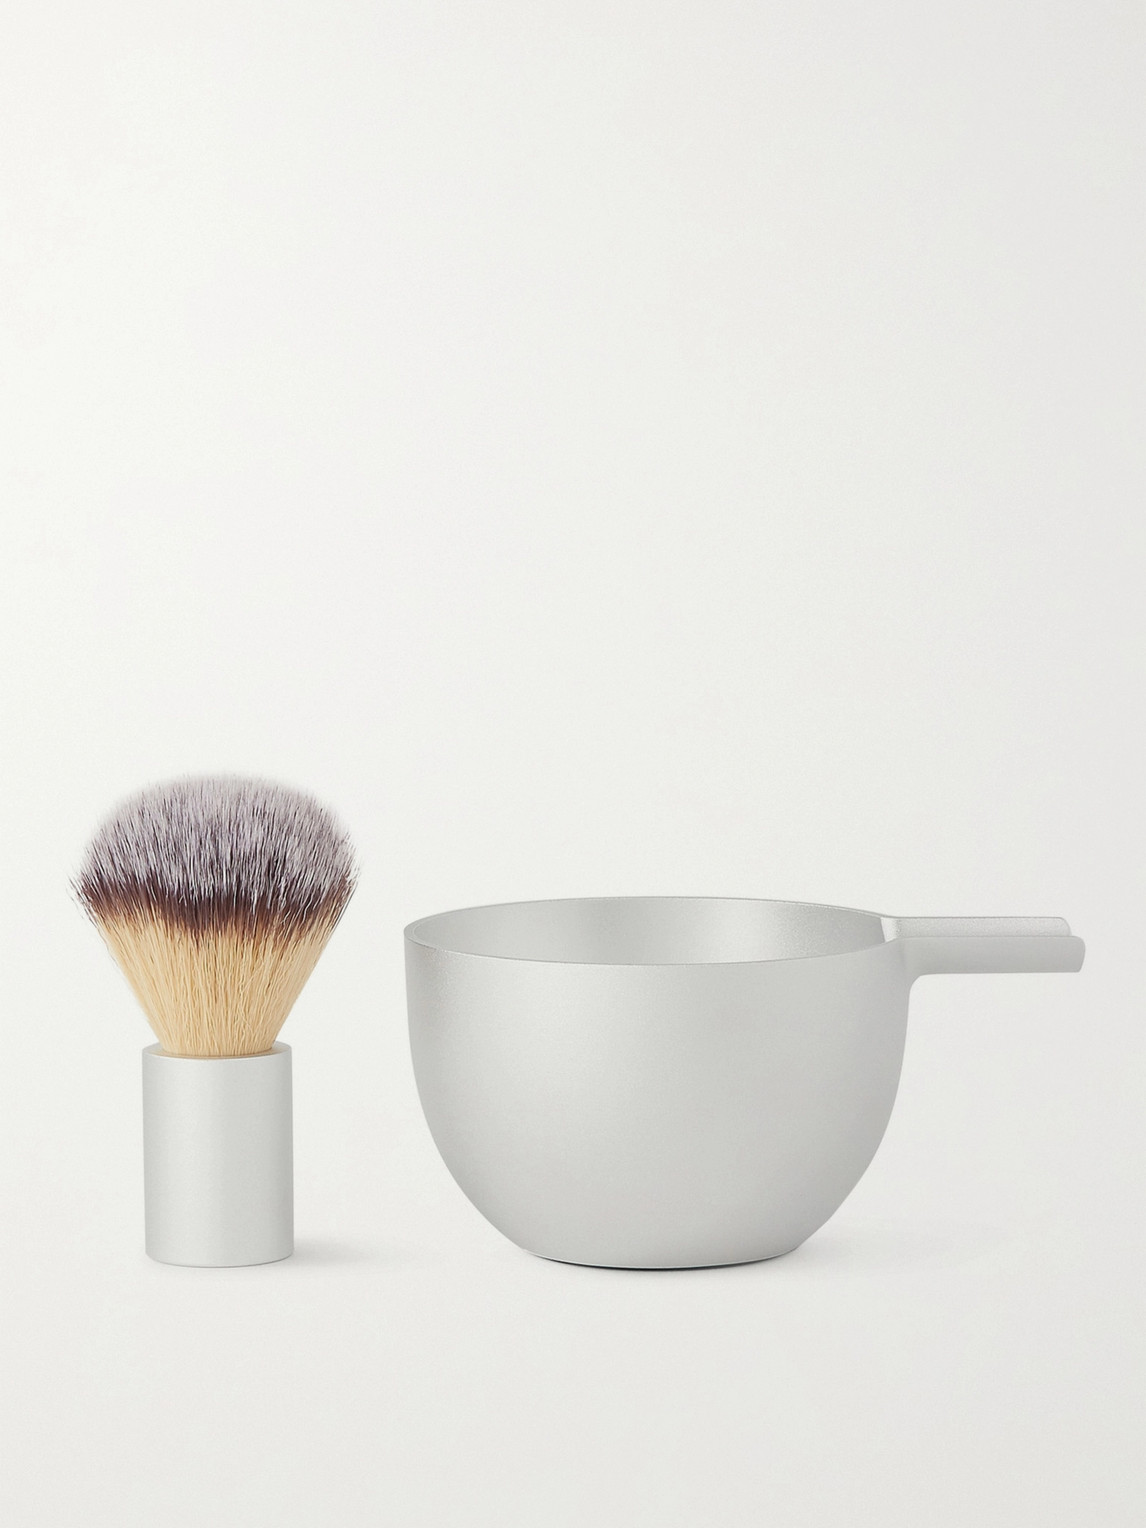 Angle By Morrama Angle Aluminium Brush And Bowl In Colorless